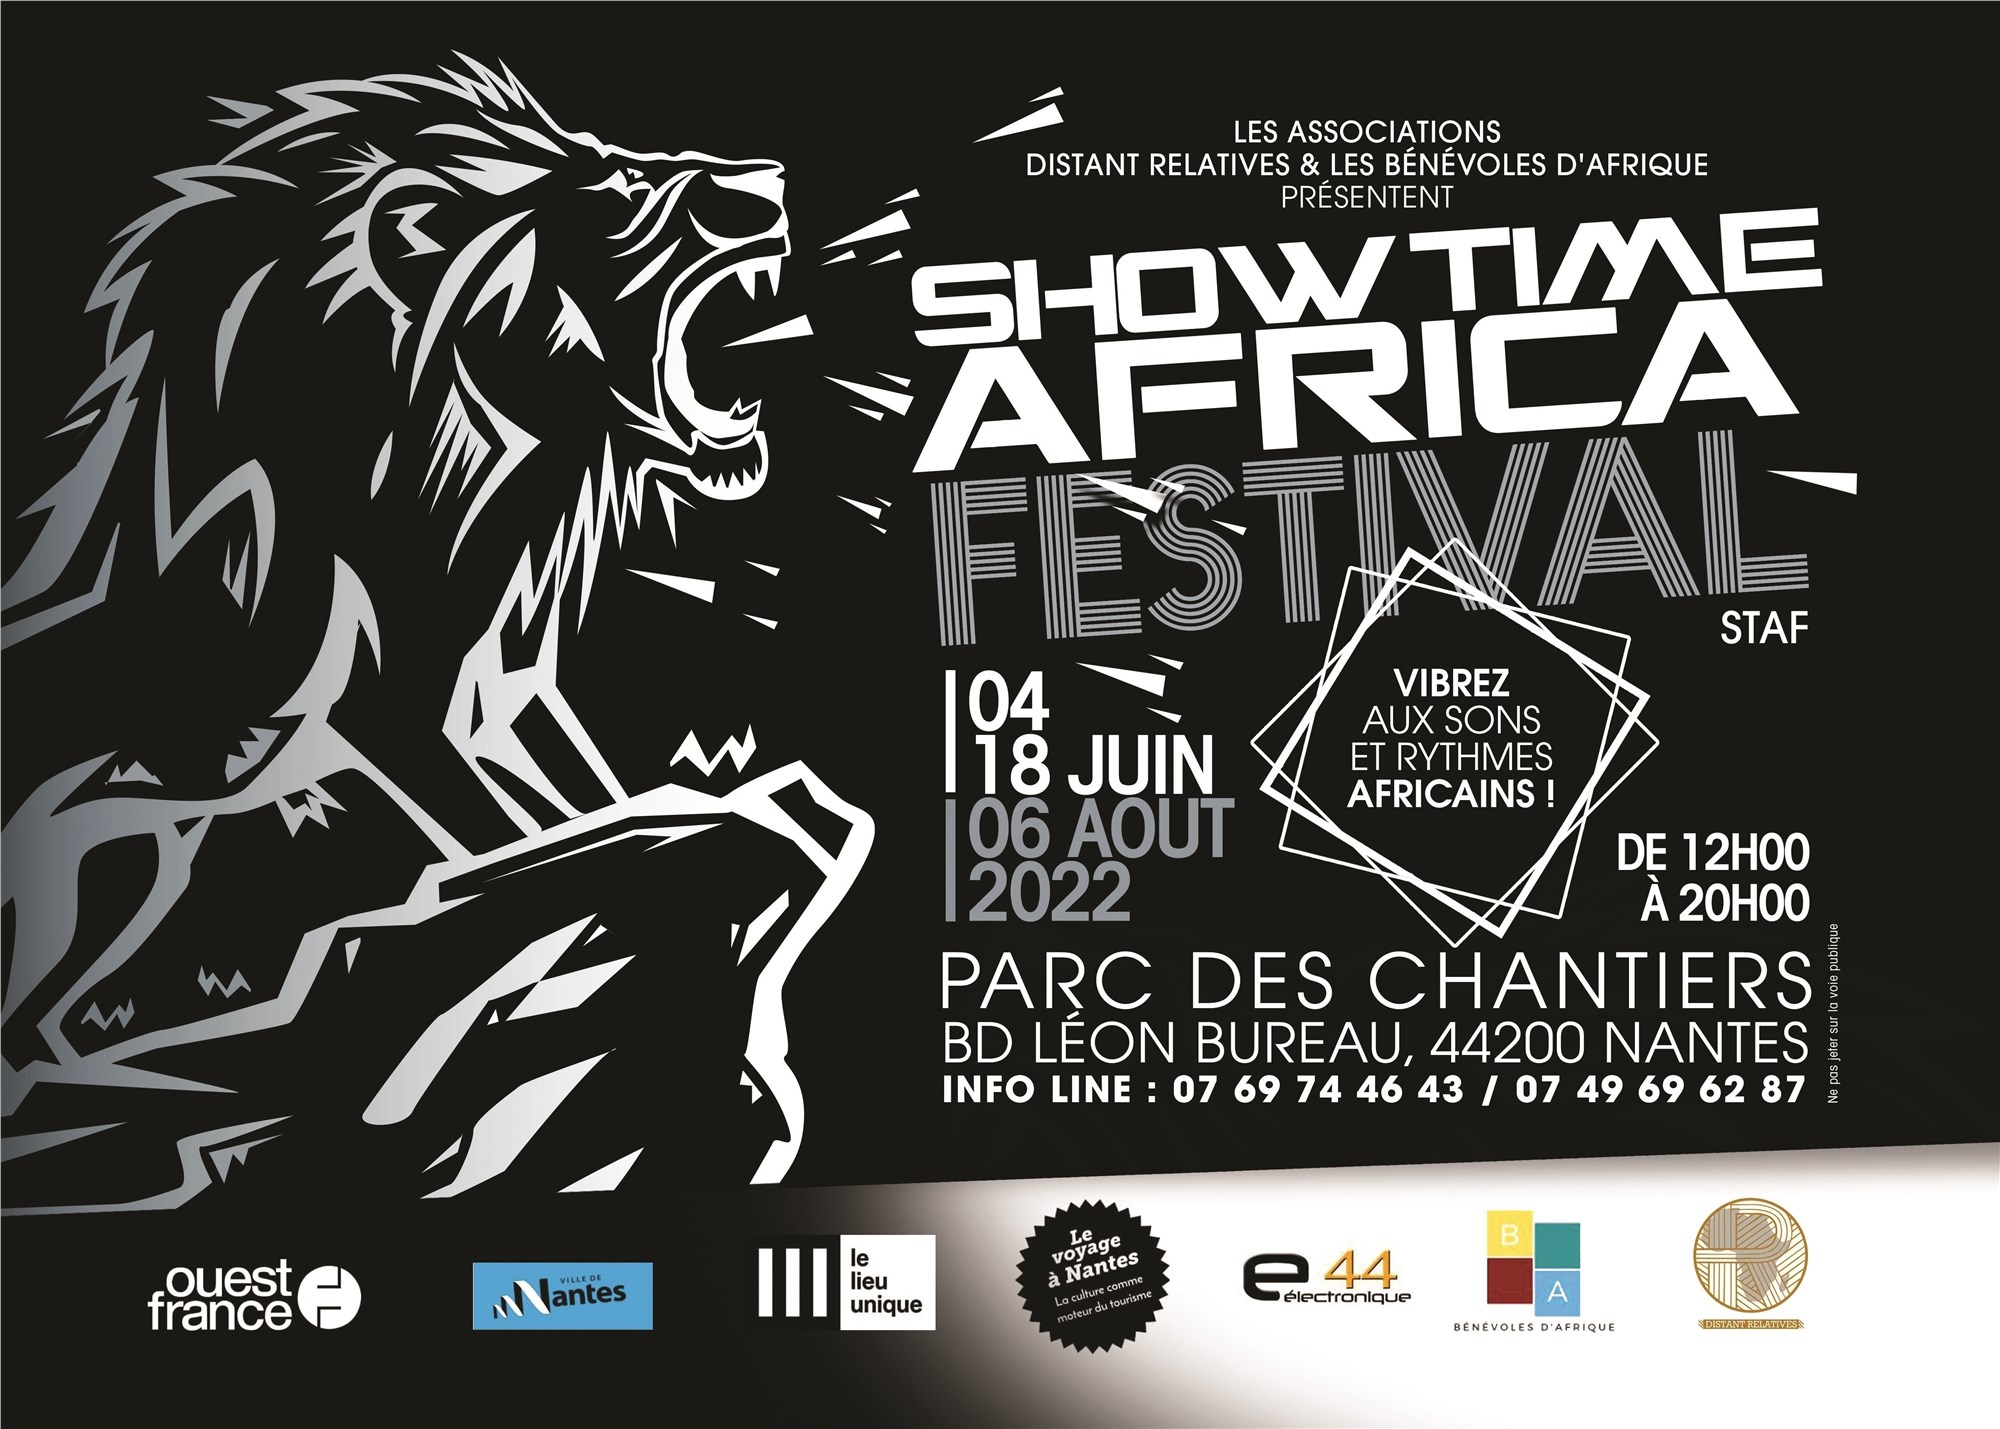 SHOW TIME AFRICA FESTIVAL